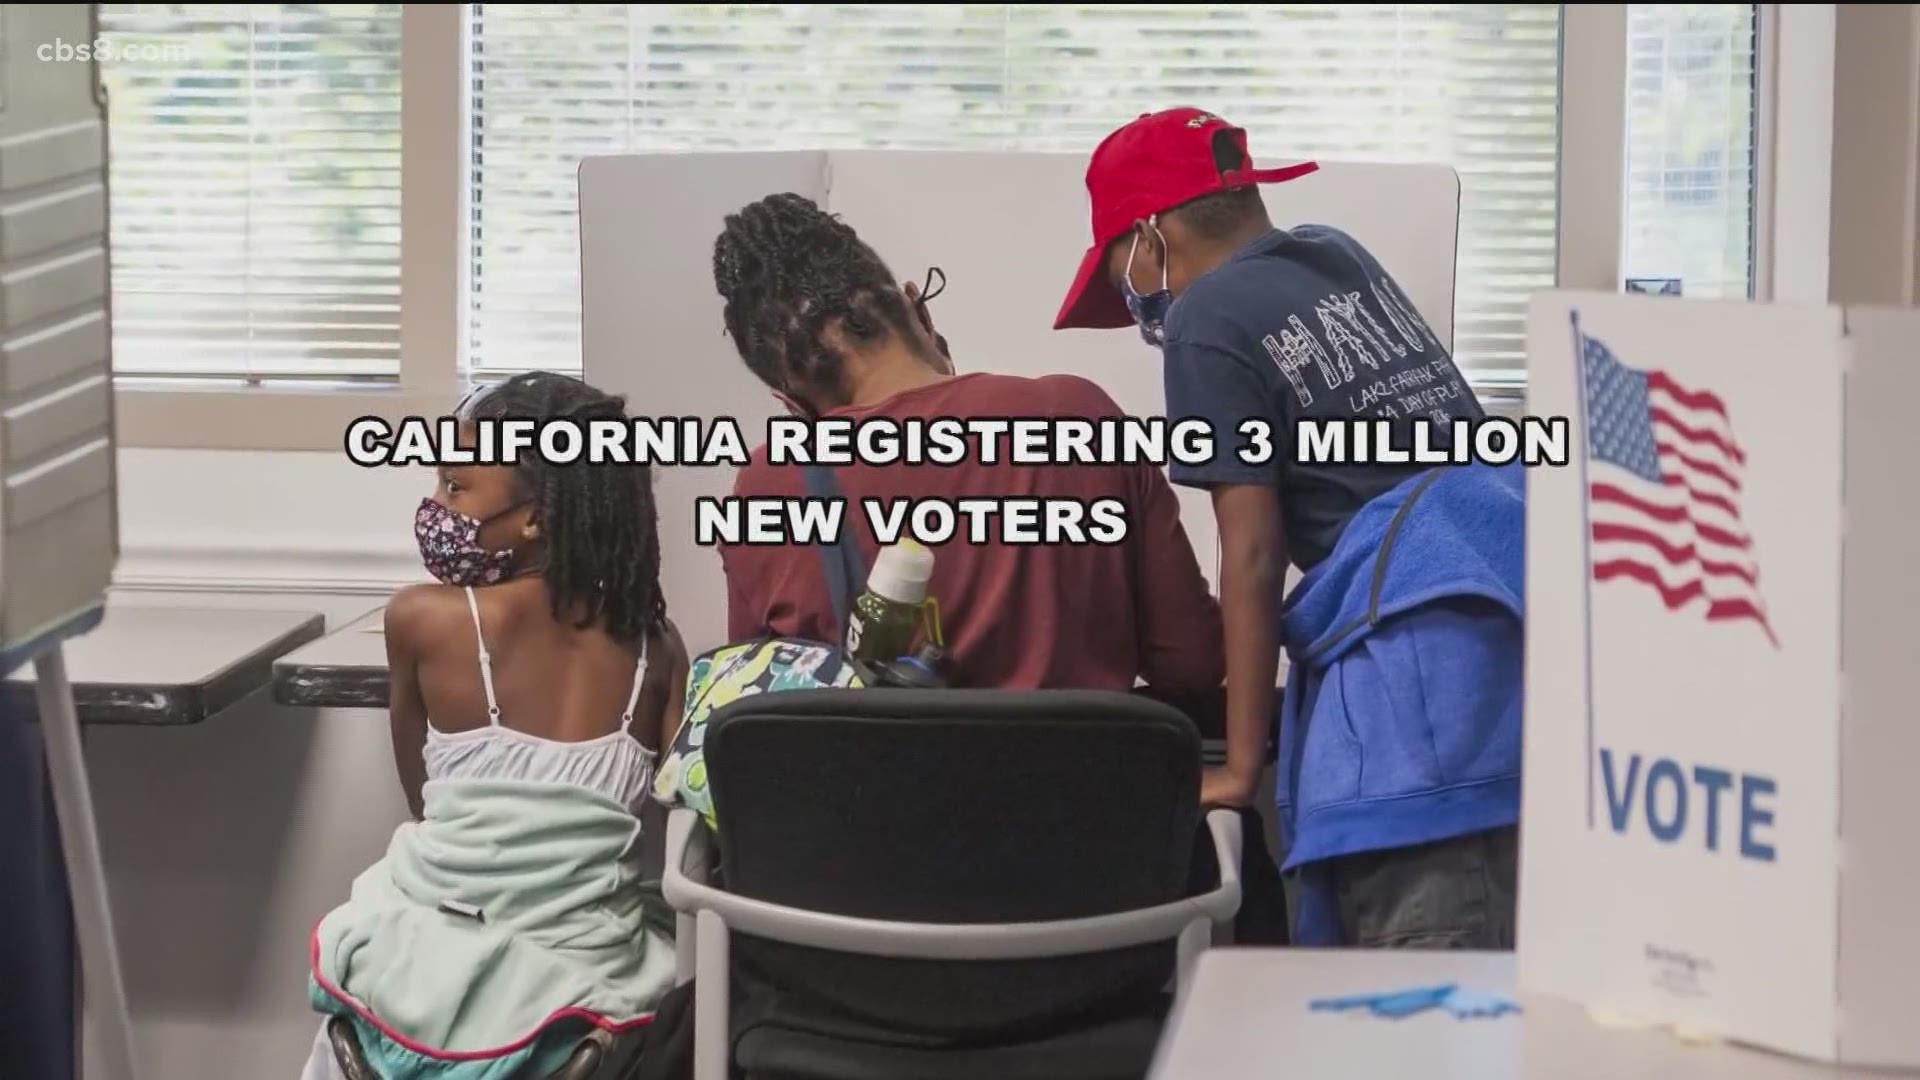 Secretary of State Alex Padilla said the spike can be attributed to California’s updated voter motor law. Others credit the enthusiasm of the contentious election.